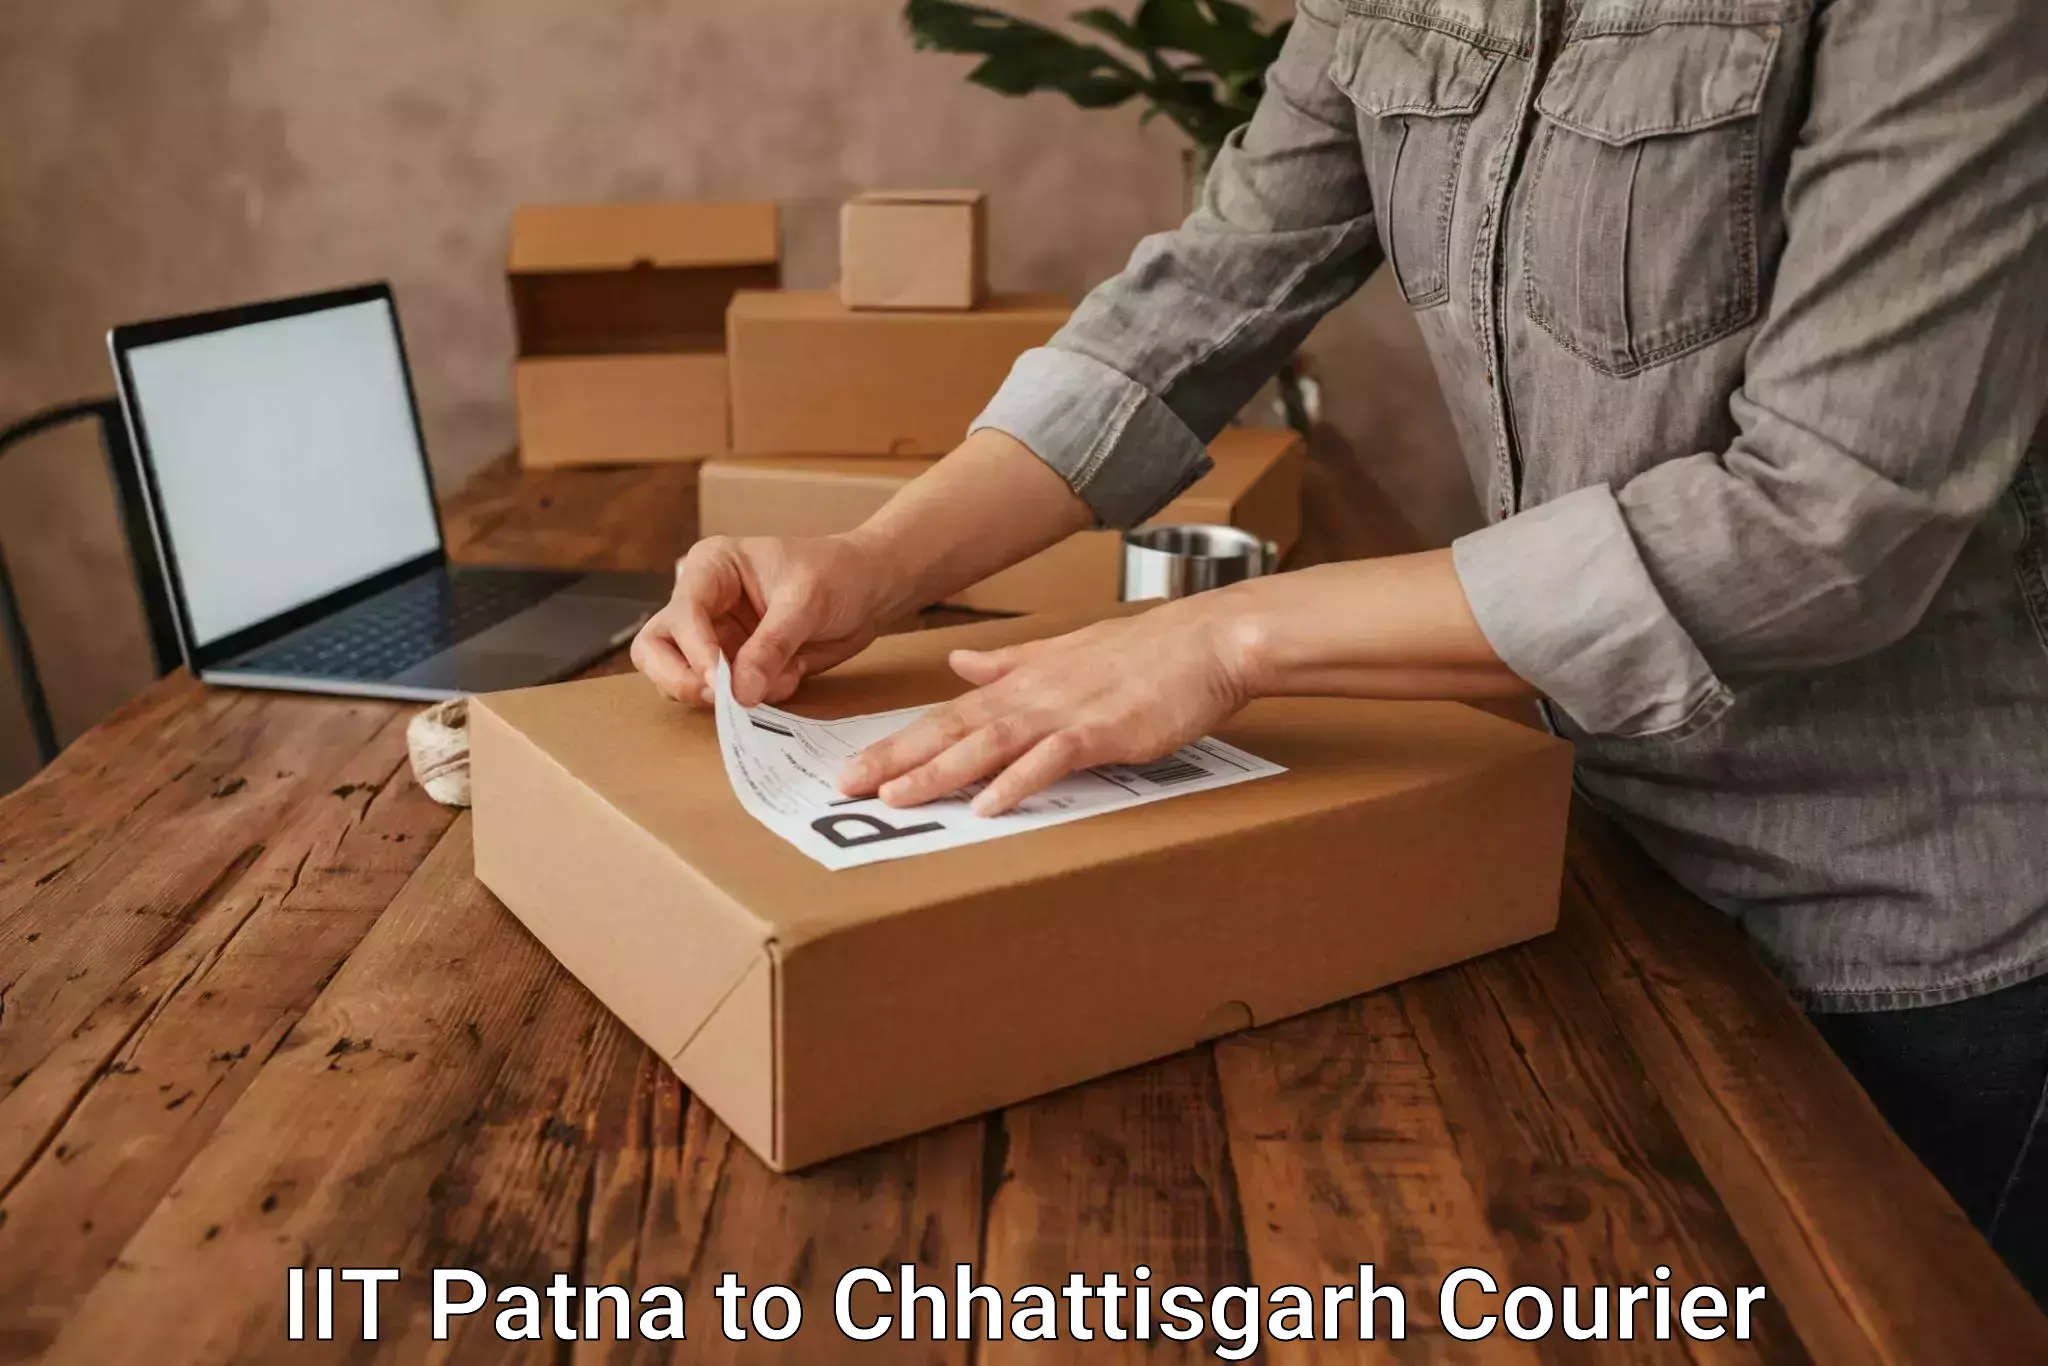 Moving and storage services IIT Patna to Chhattisgarh